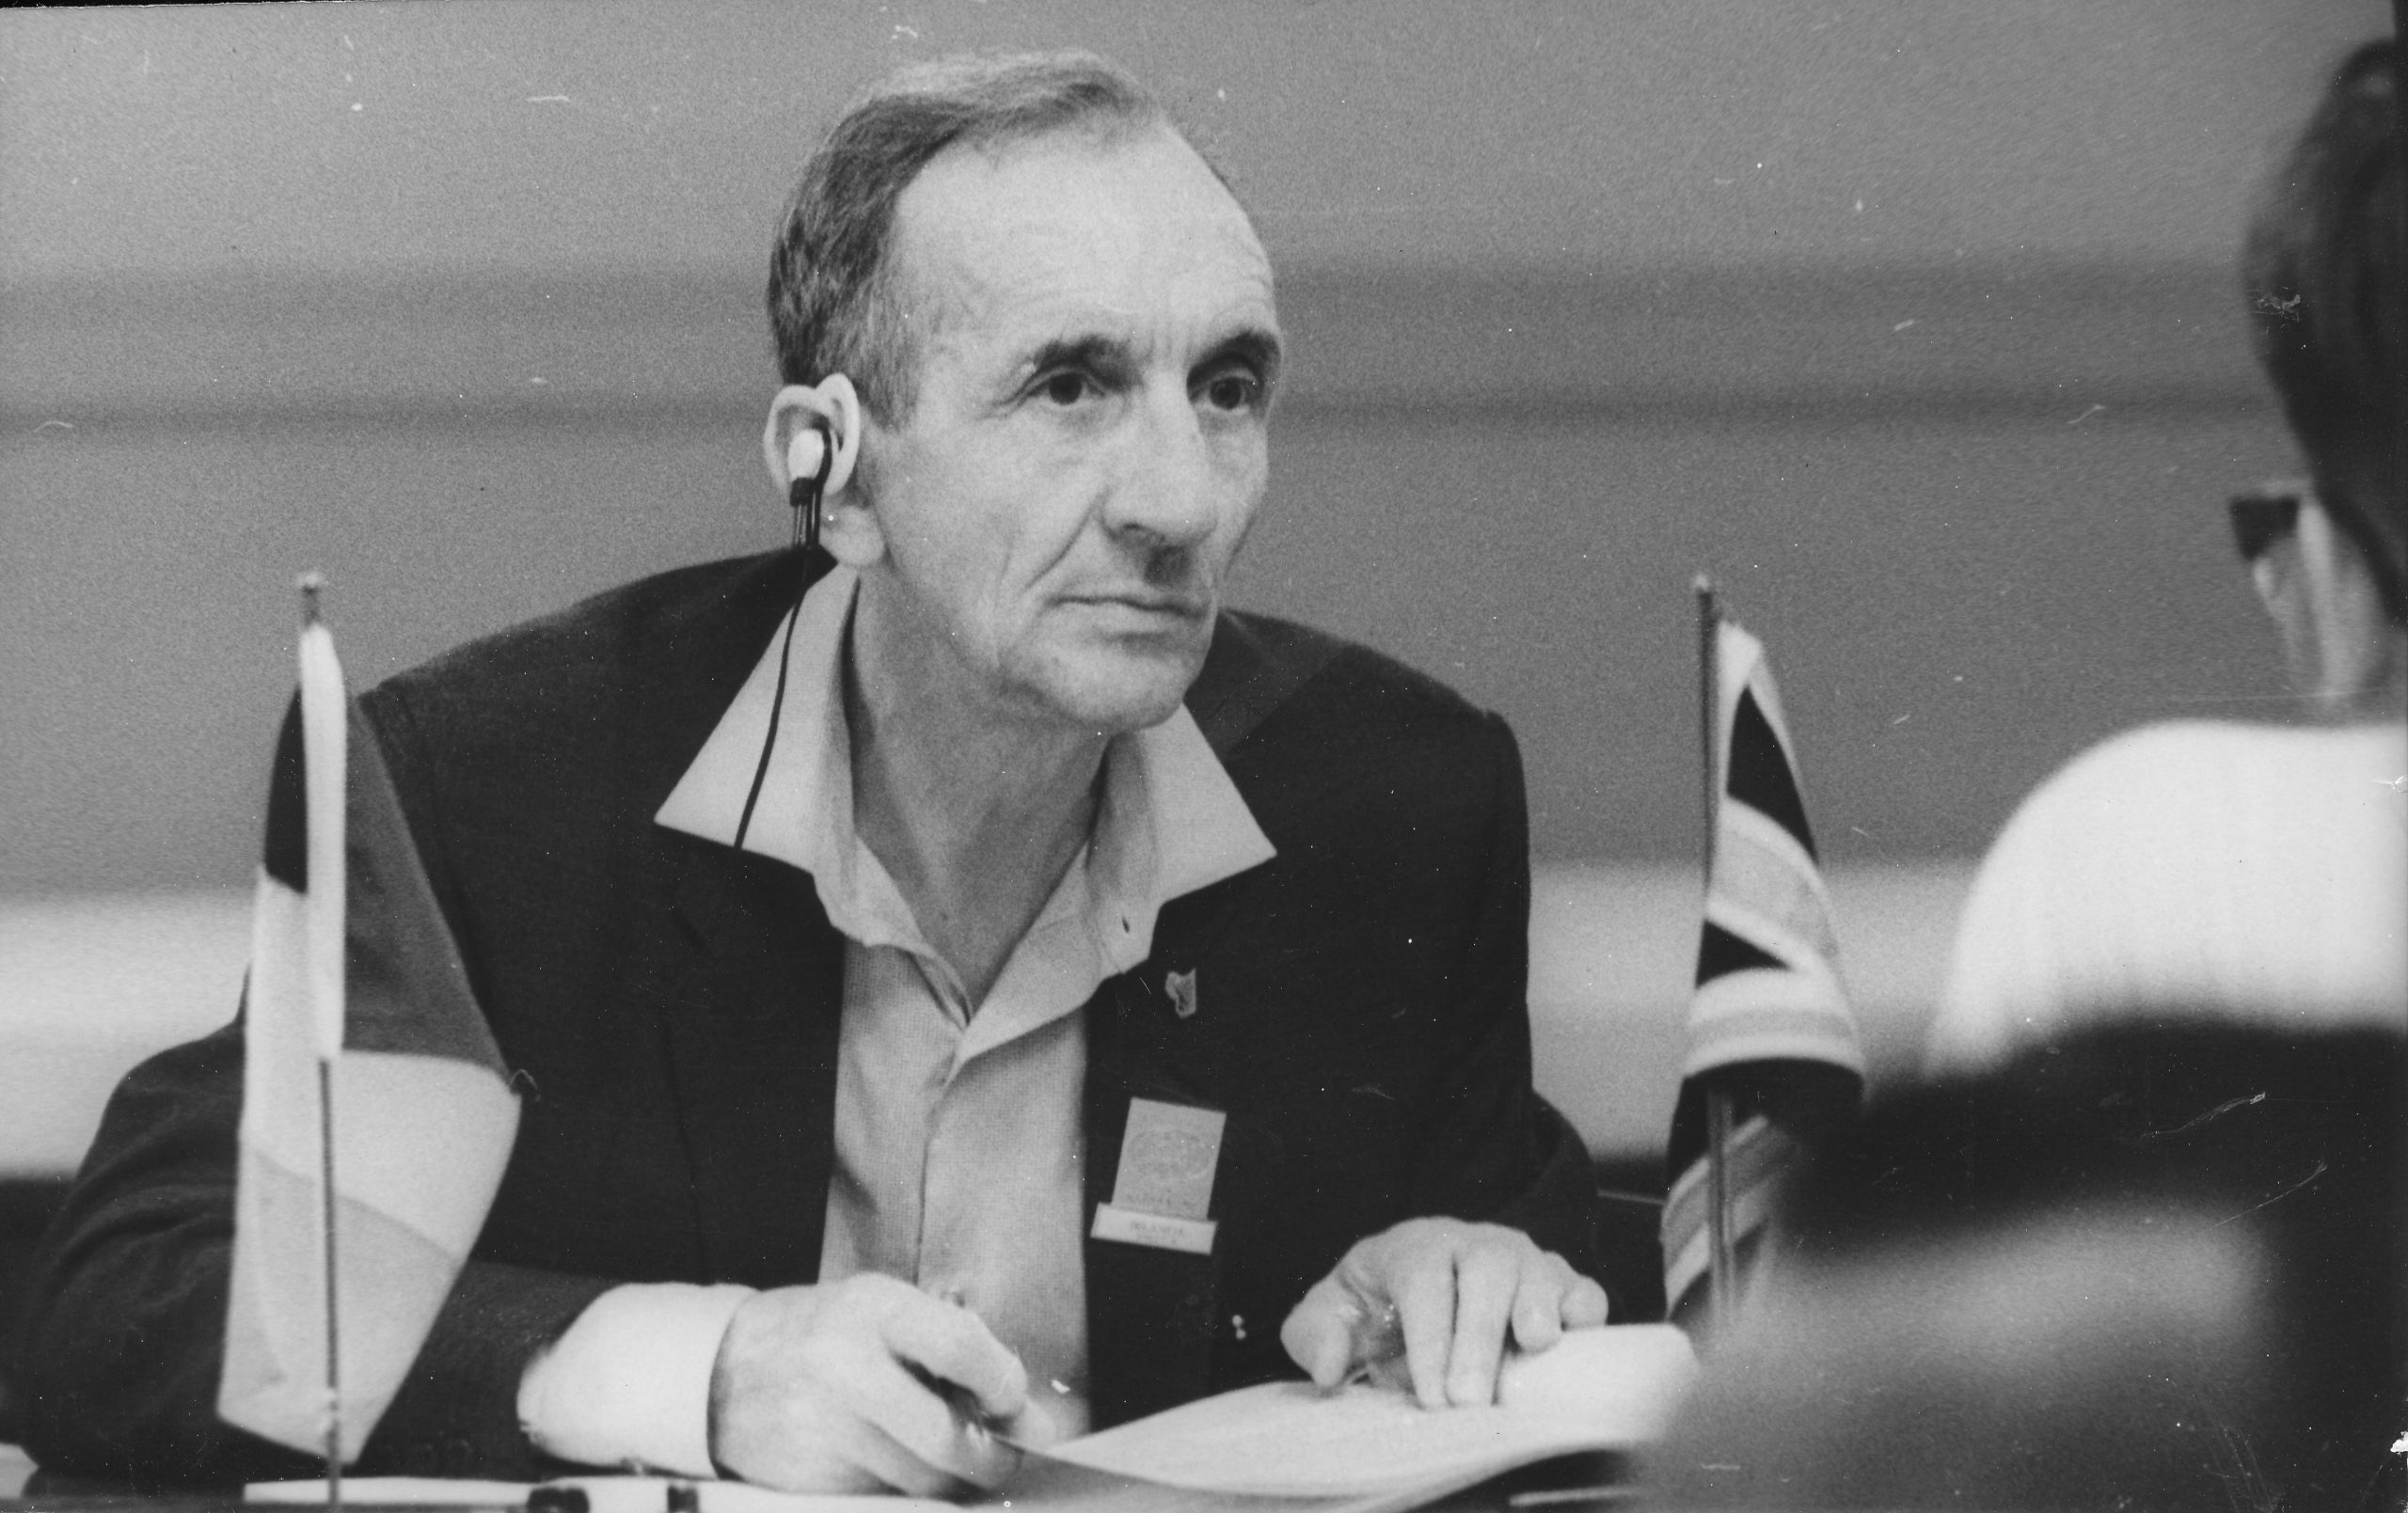 Brian Reilly at a FIDE Congress (possibly Nice 1974?)